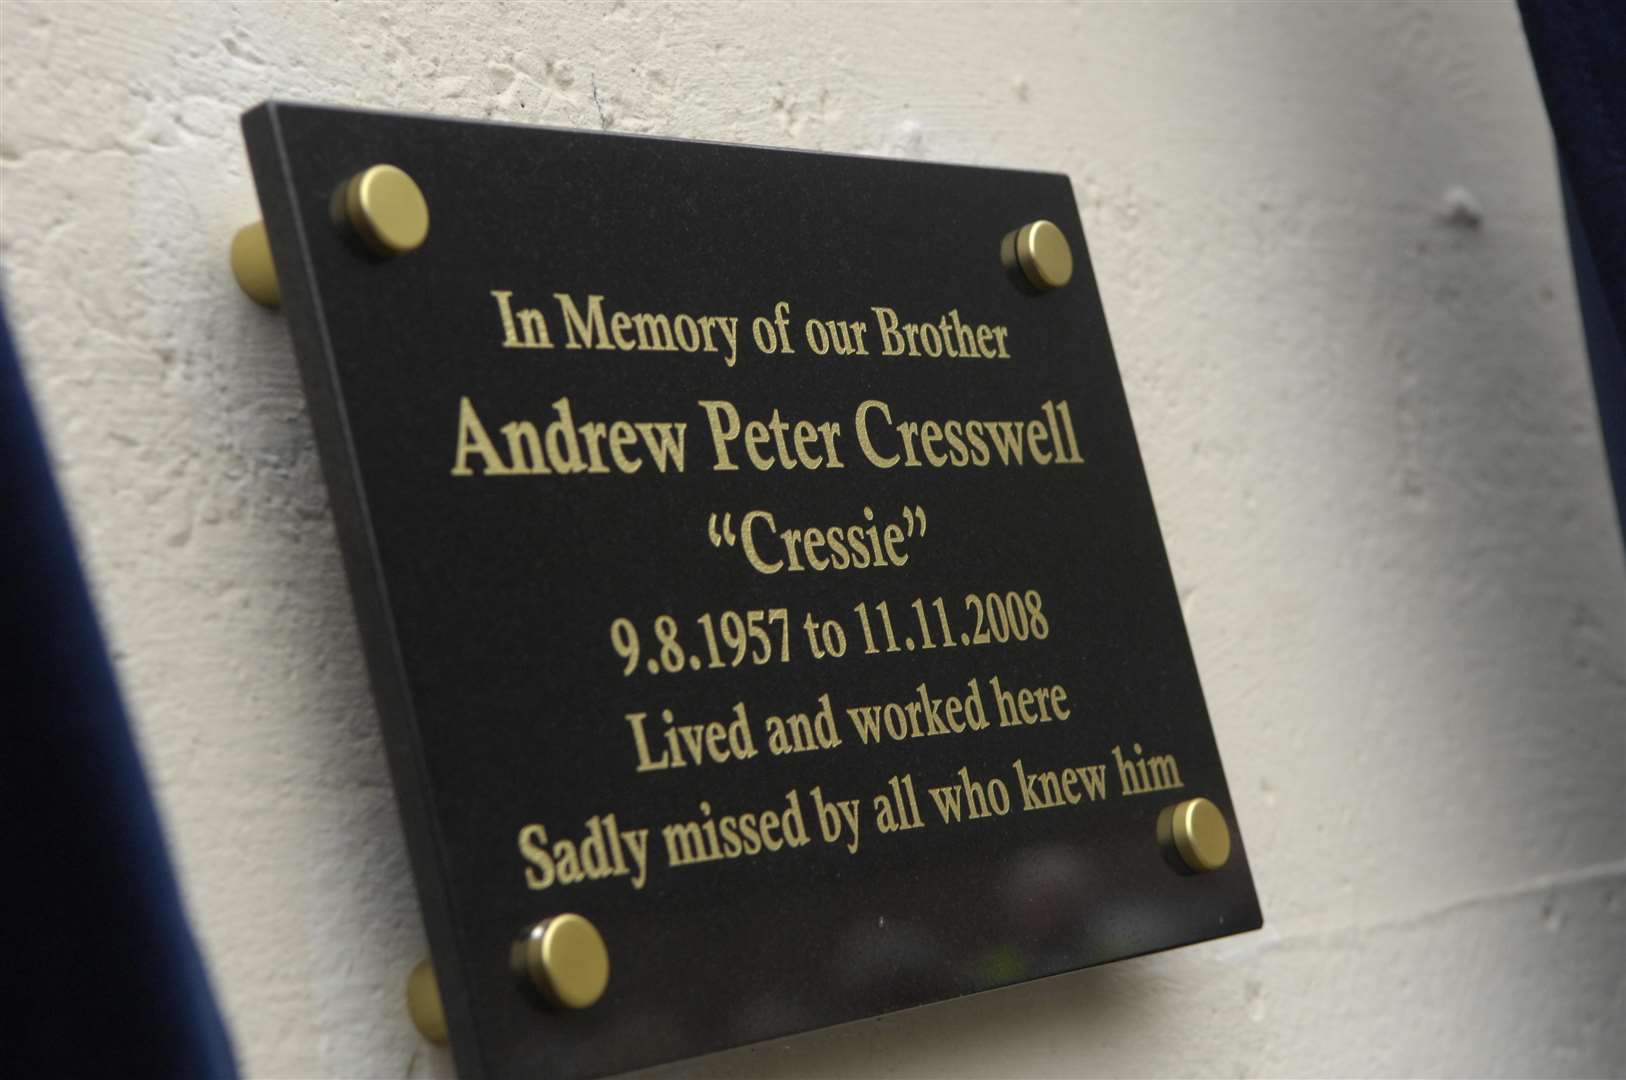 Biker friends from the 75 club, unveiled a plaque to Andrew Cresswell, who was murdered in 2008